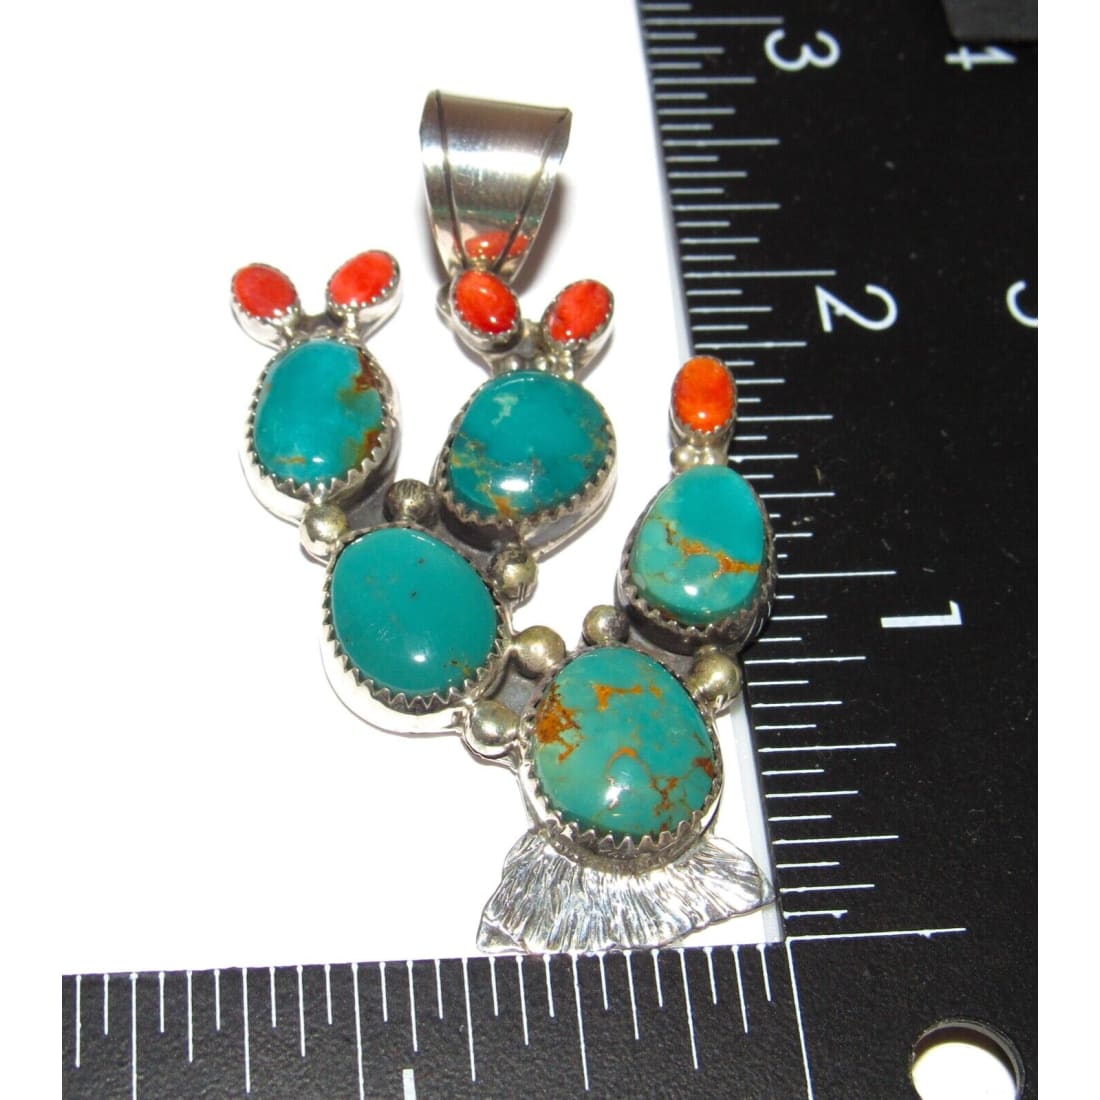 Navajo Prickly Pear Cactus Pendant Sterling Silver Turquoise